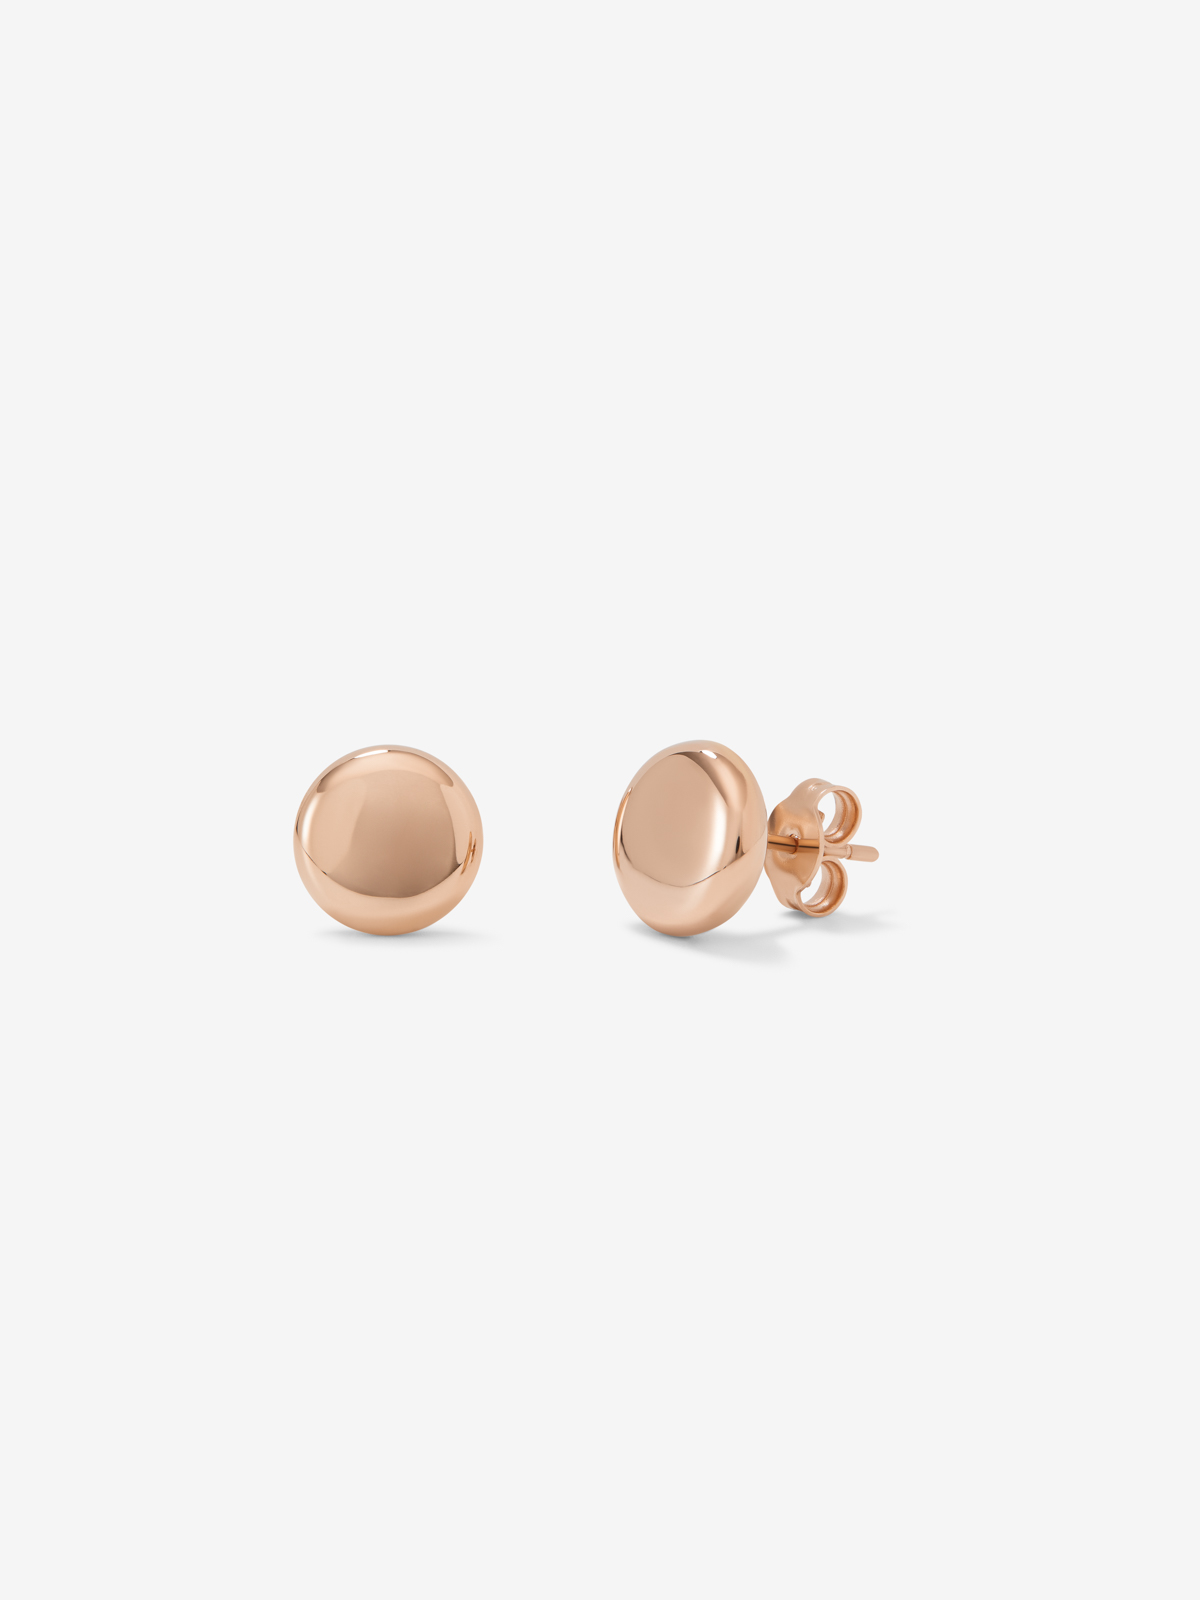 Large 18K Rose Gold Button Earrings